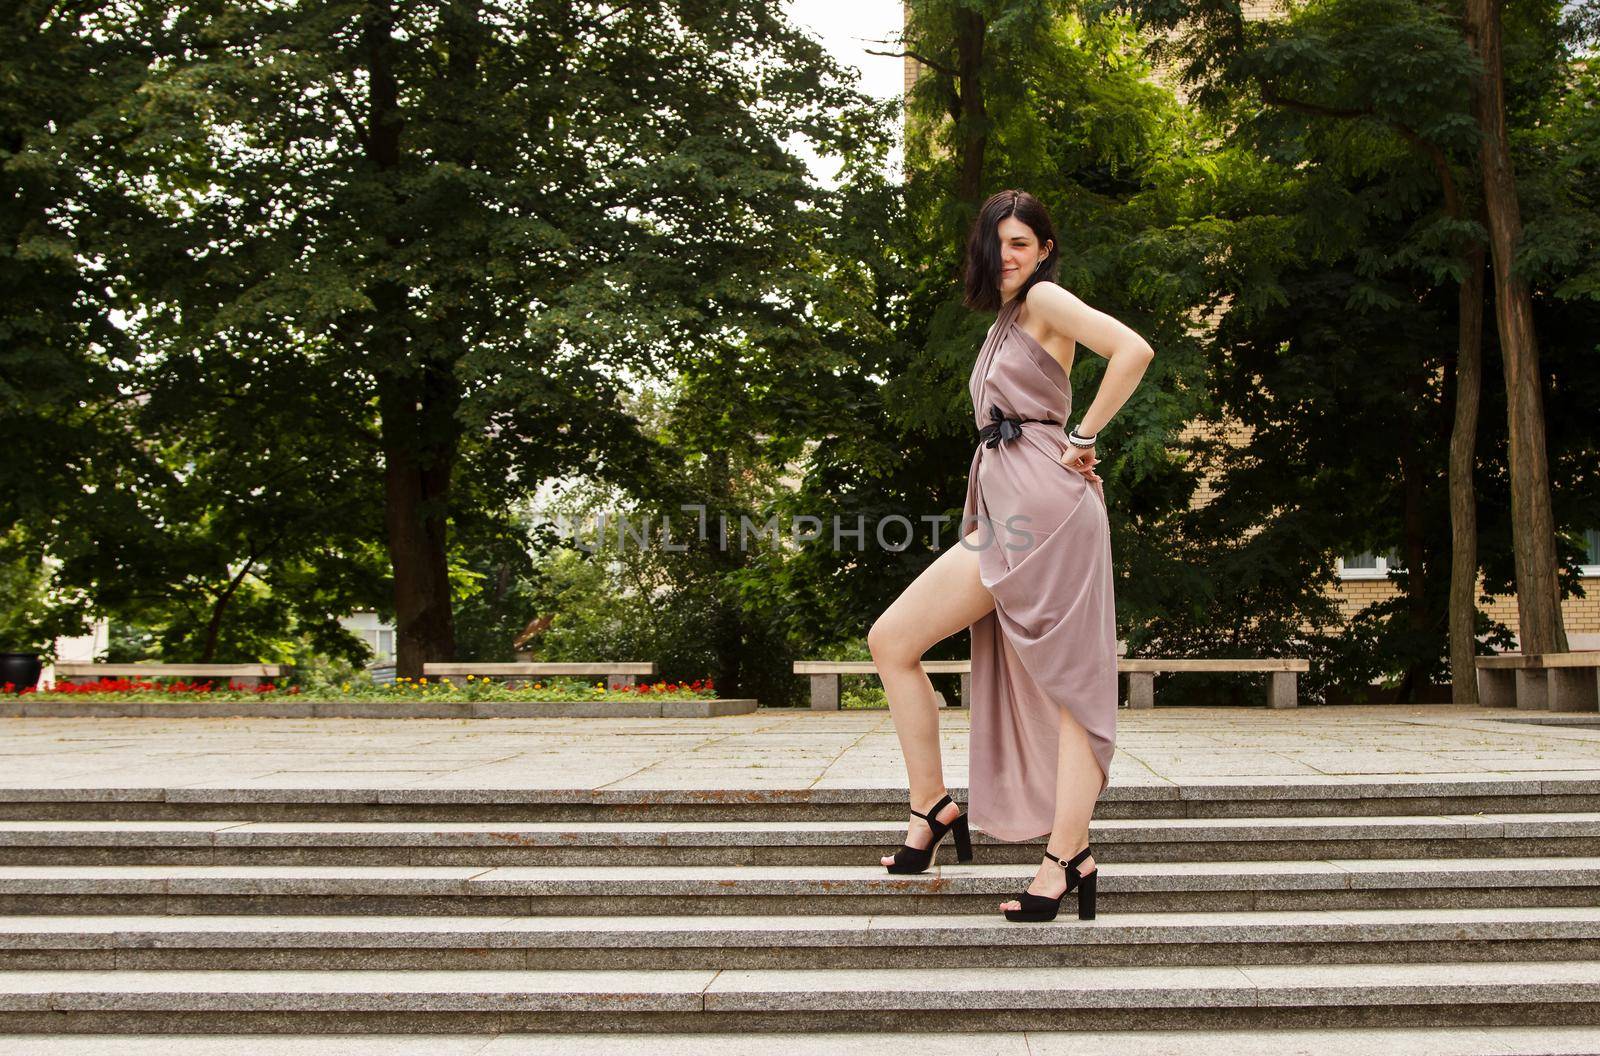 young beautiful woman standing on the stairs in the city park by raddnatt